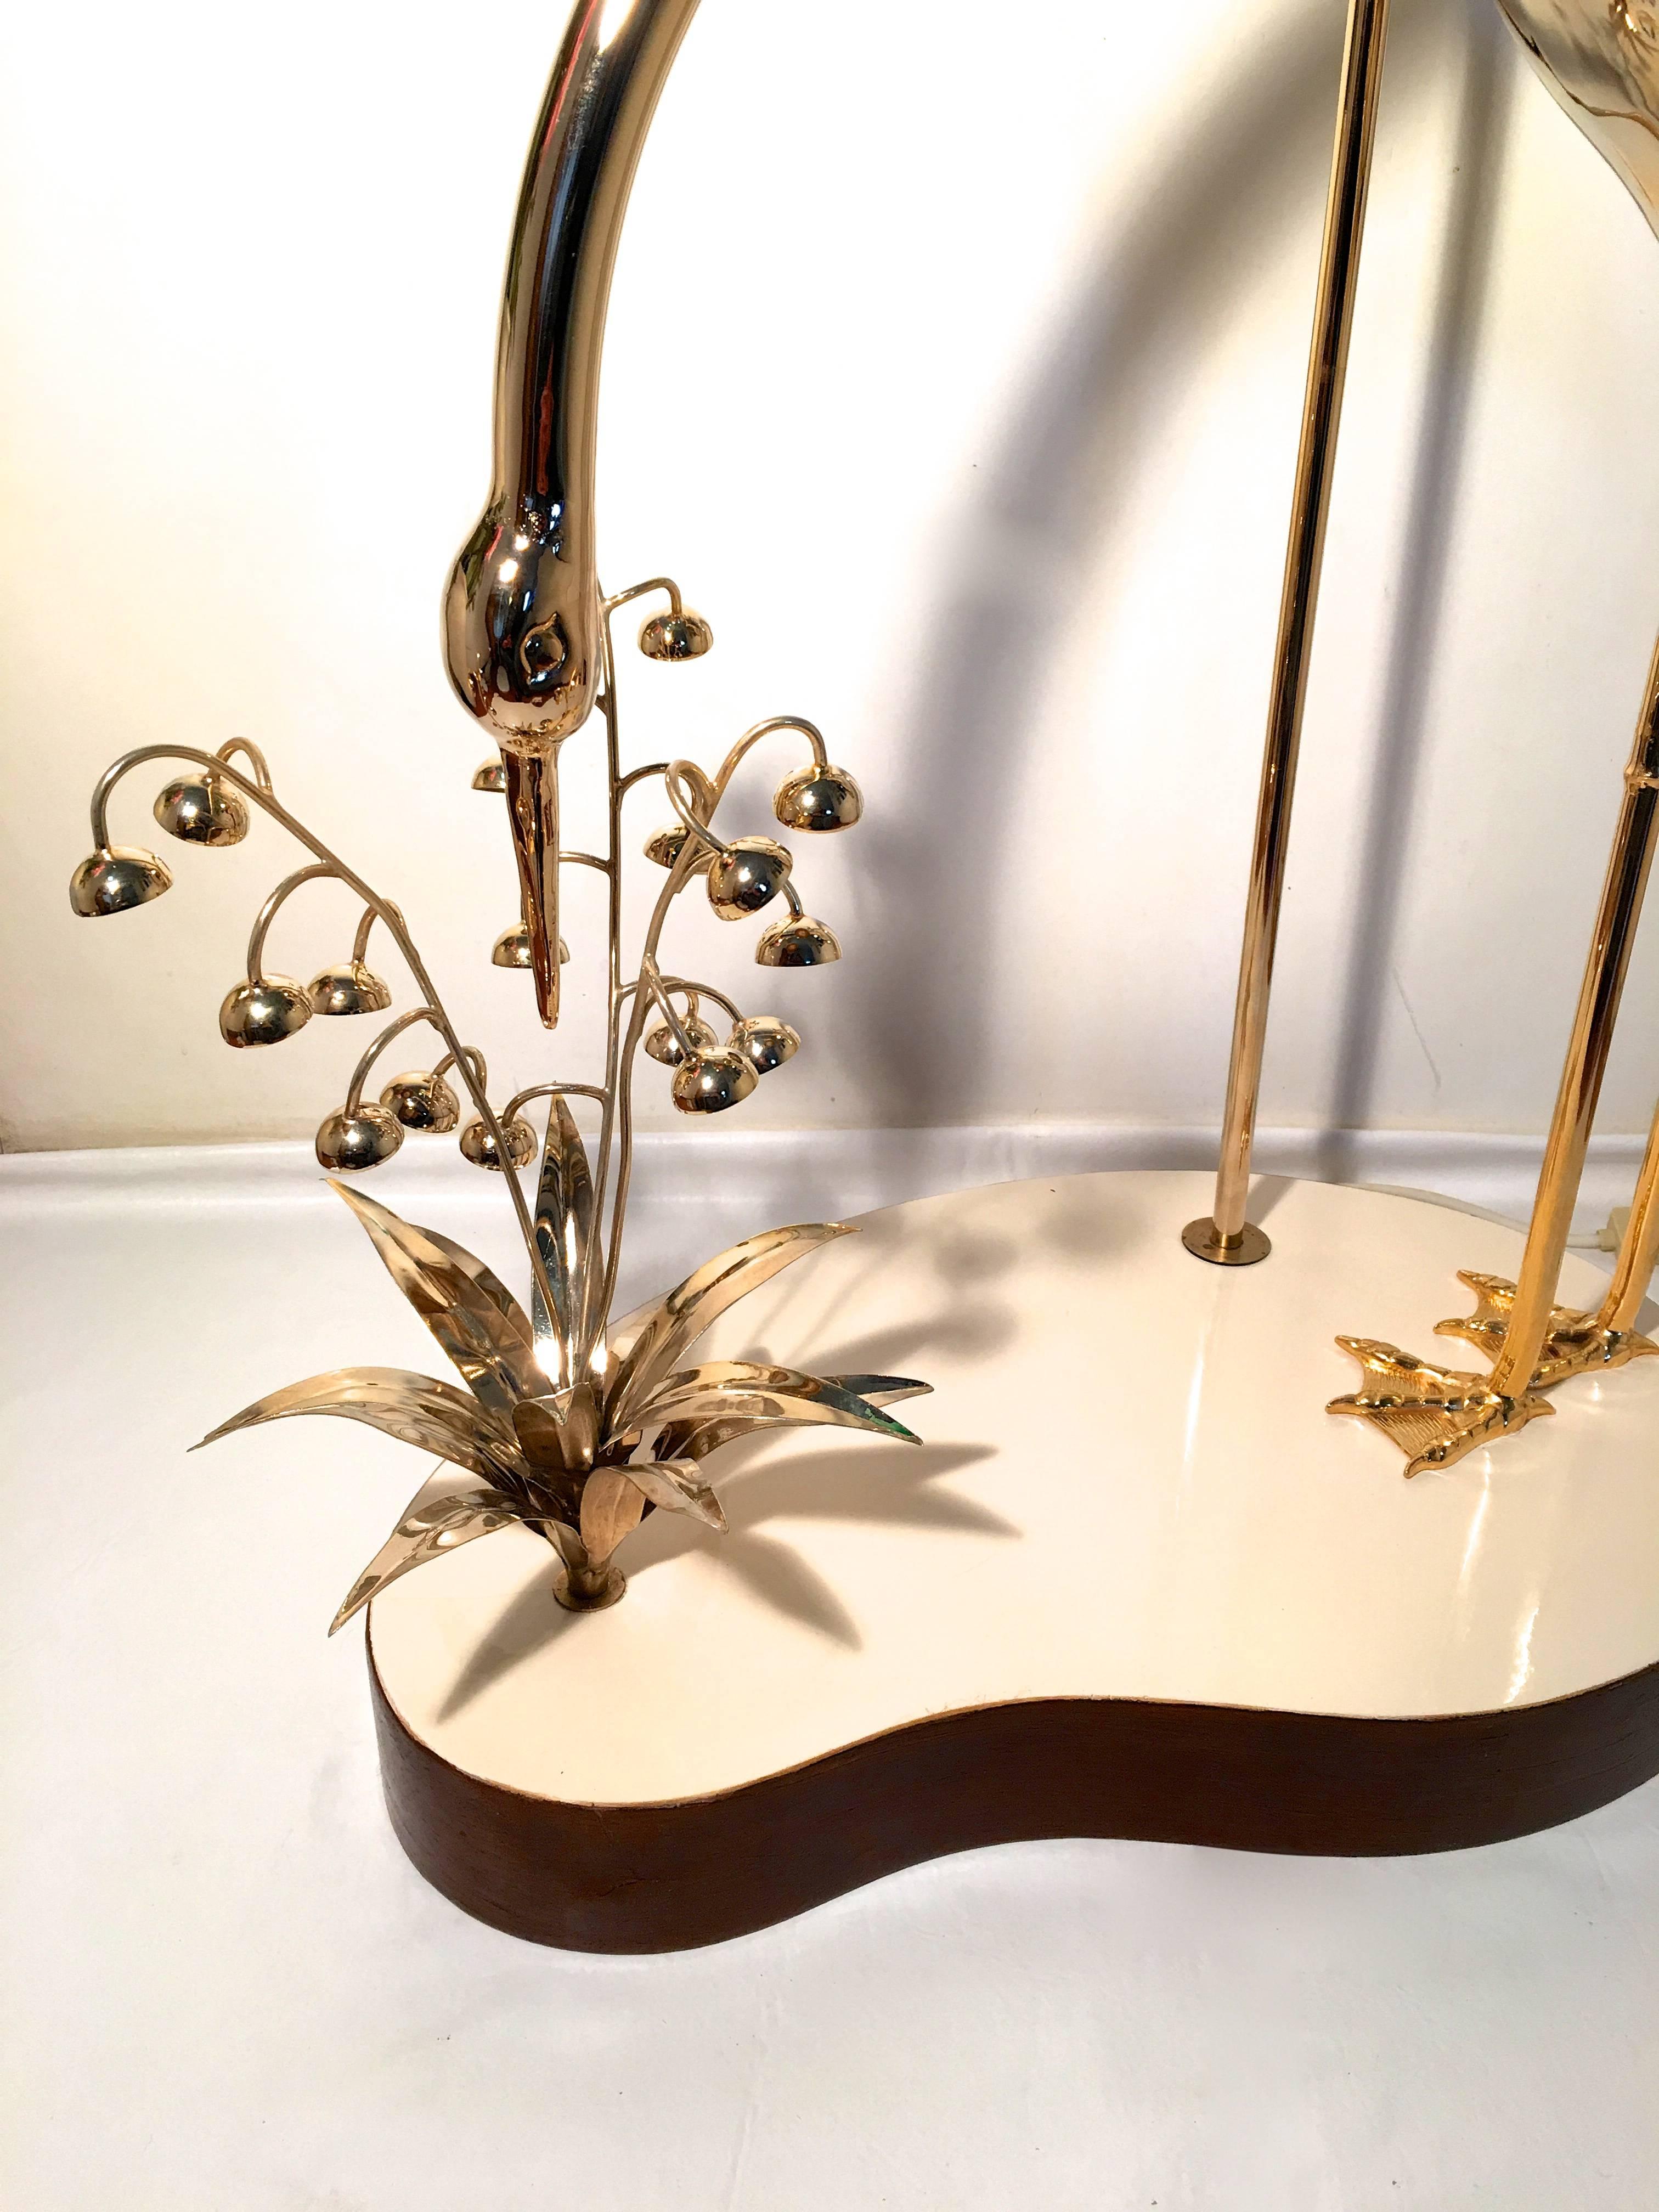 Regency Floor Lamp with a Brass Sculpture of a Heron and Flowers